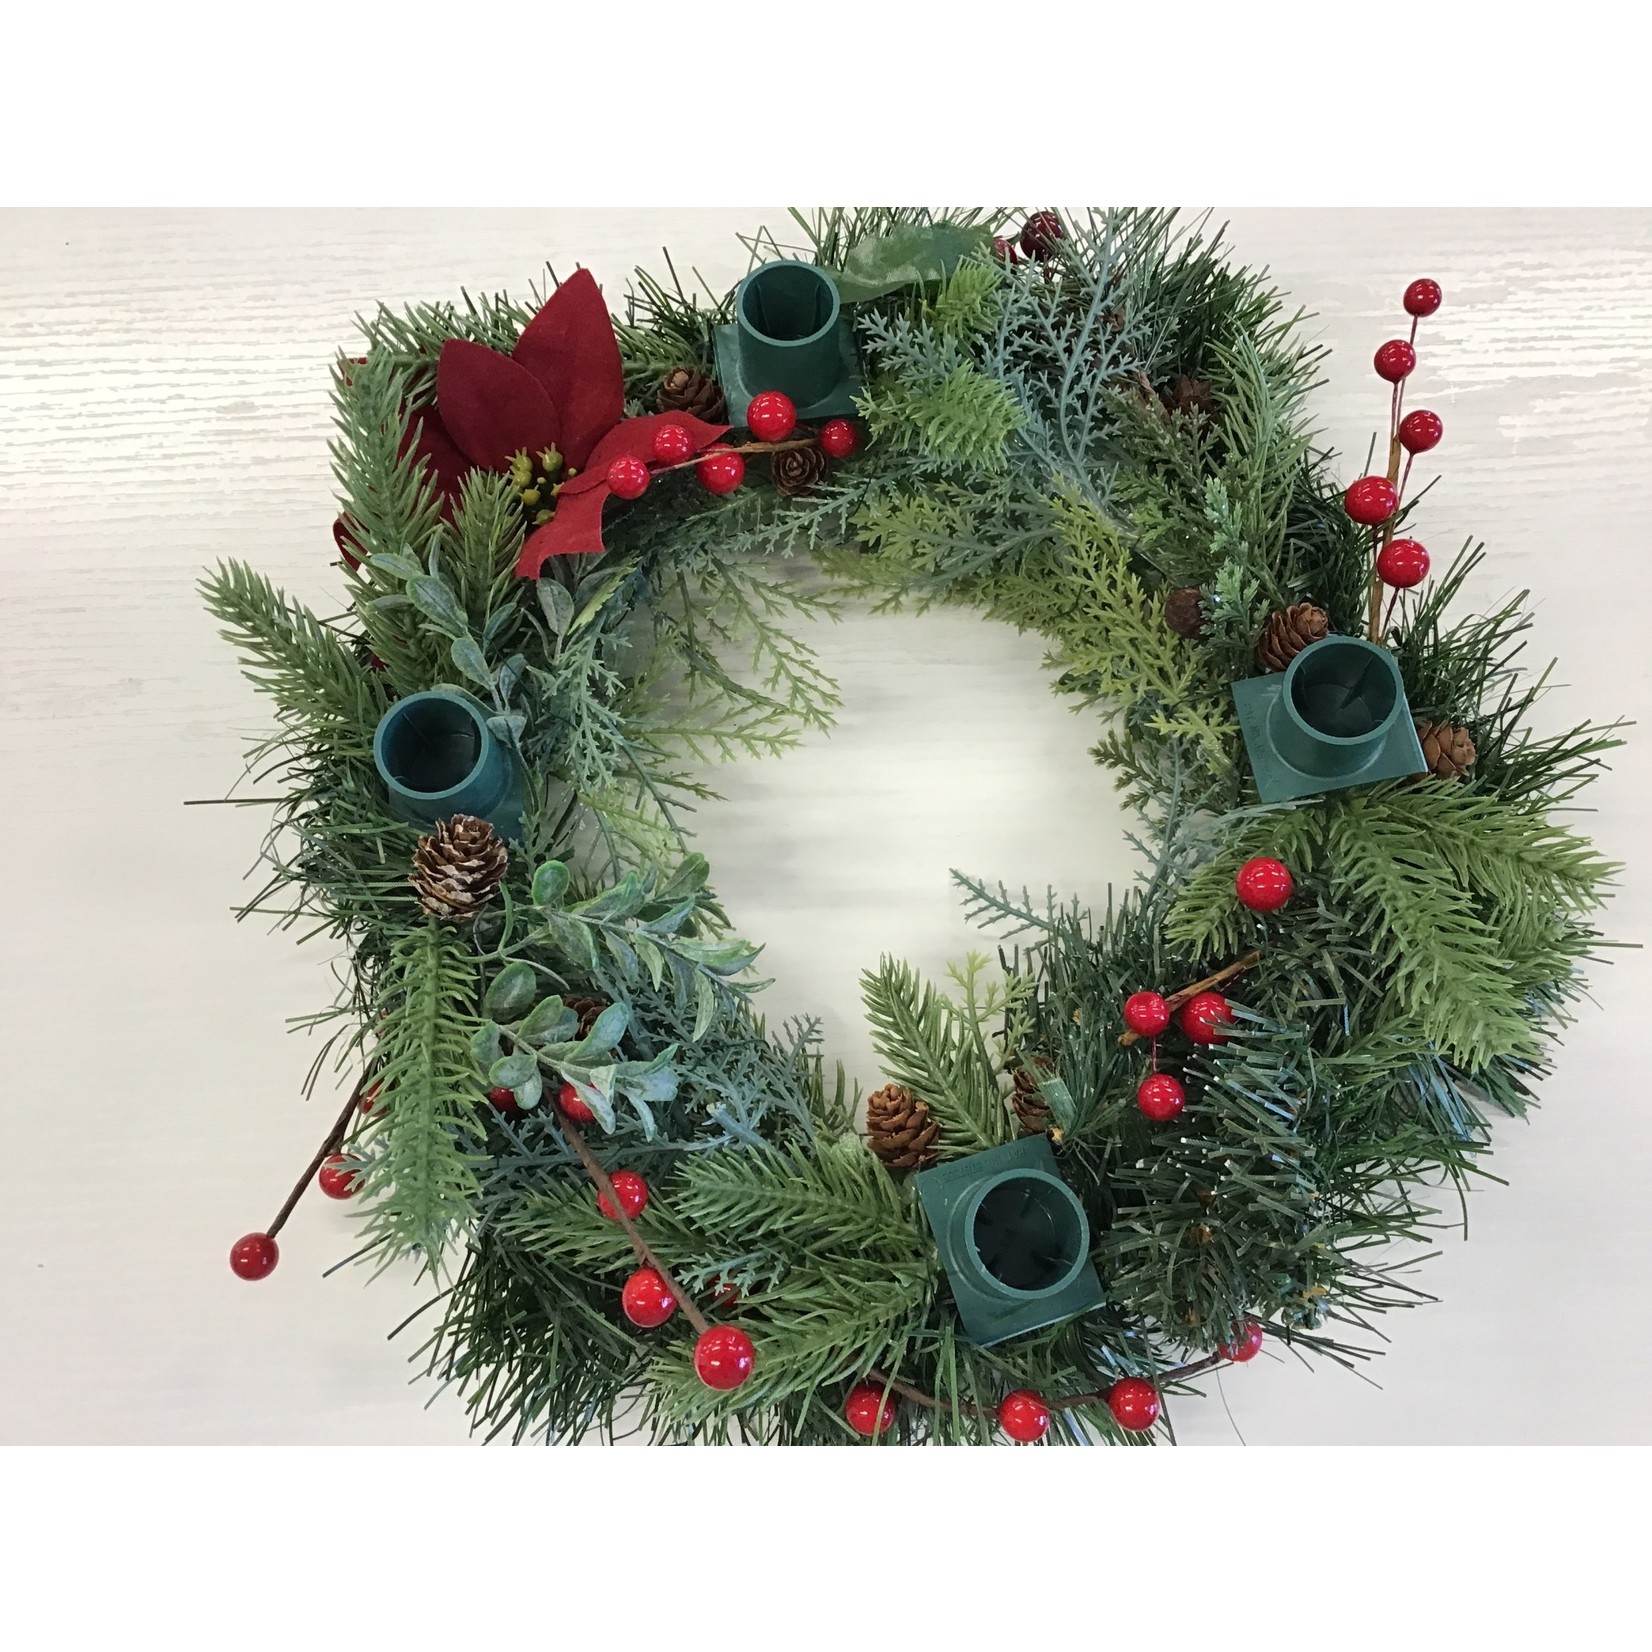 Advent Wreath with Greenery Small